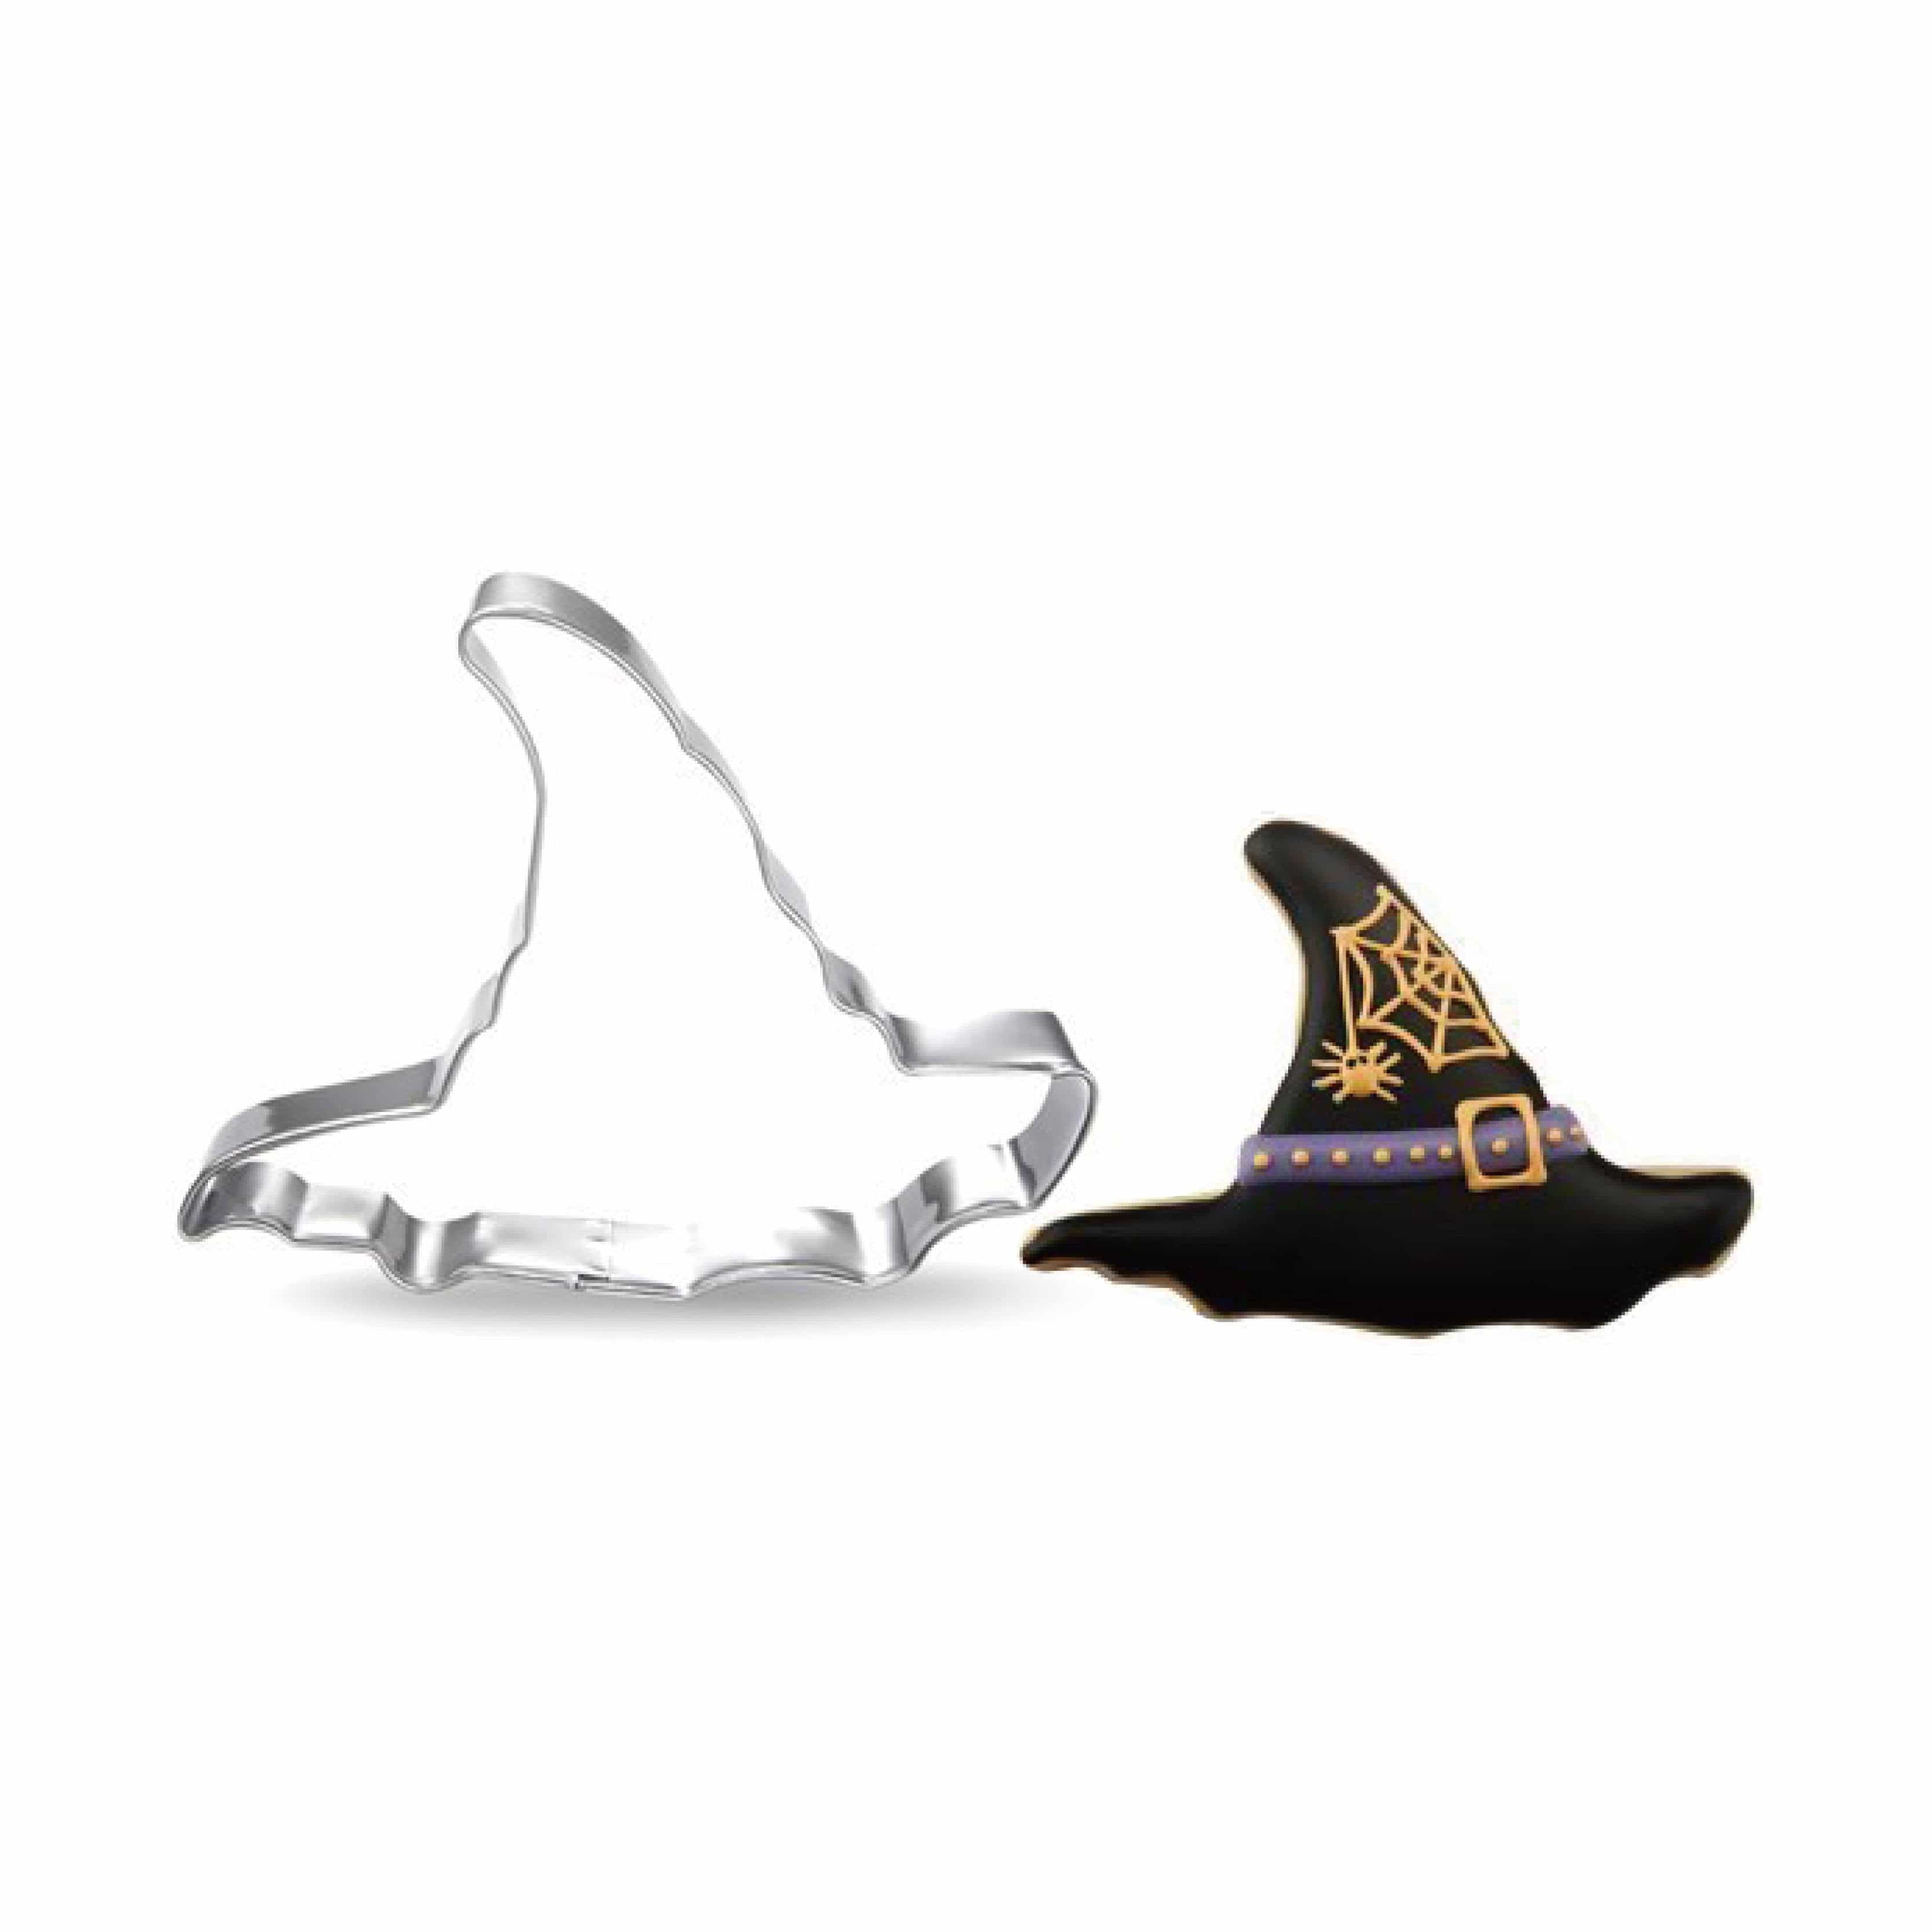 Happy Sprinkles Sprinkles Witch's hat - Cookie cutter